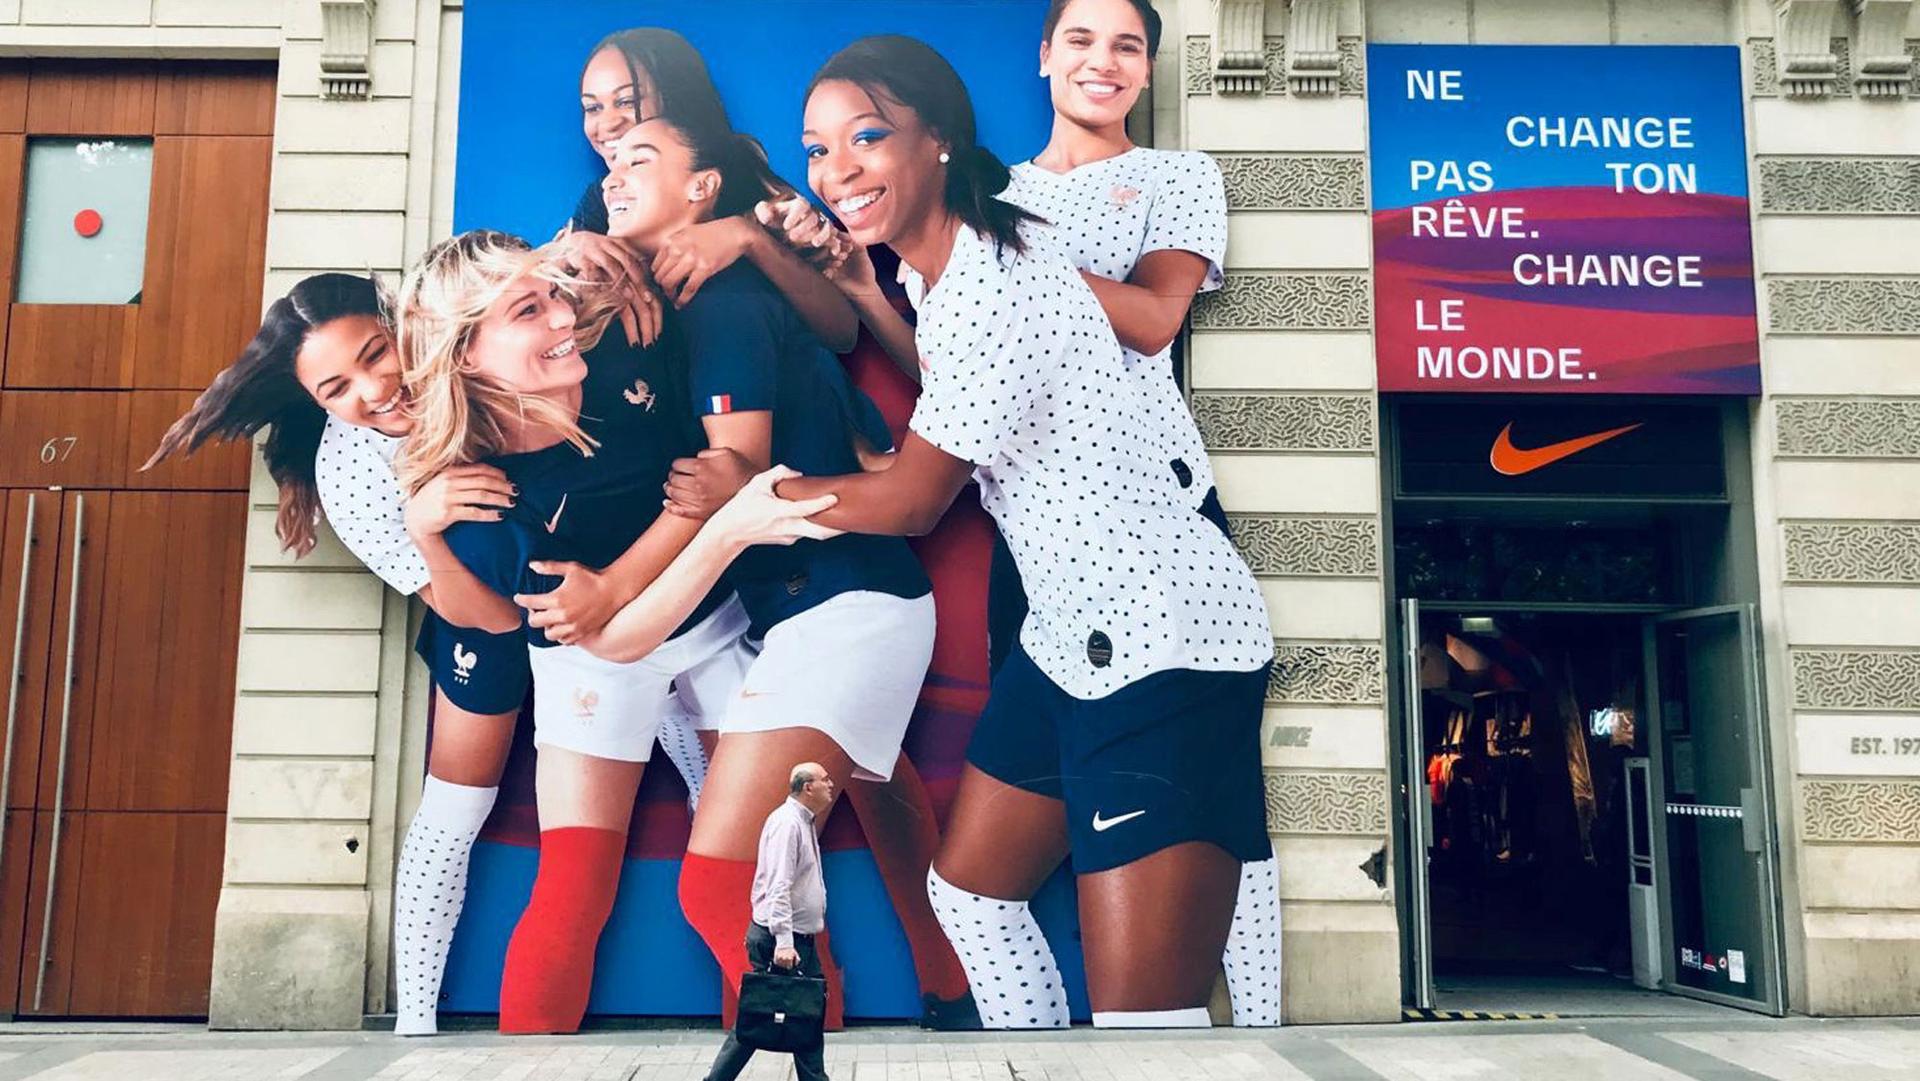 A manis shown with a briefcase walking past a billboard showing members of the French Women's World Cup soccer team hugging.